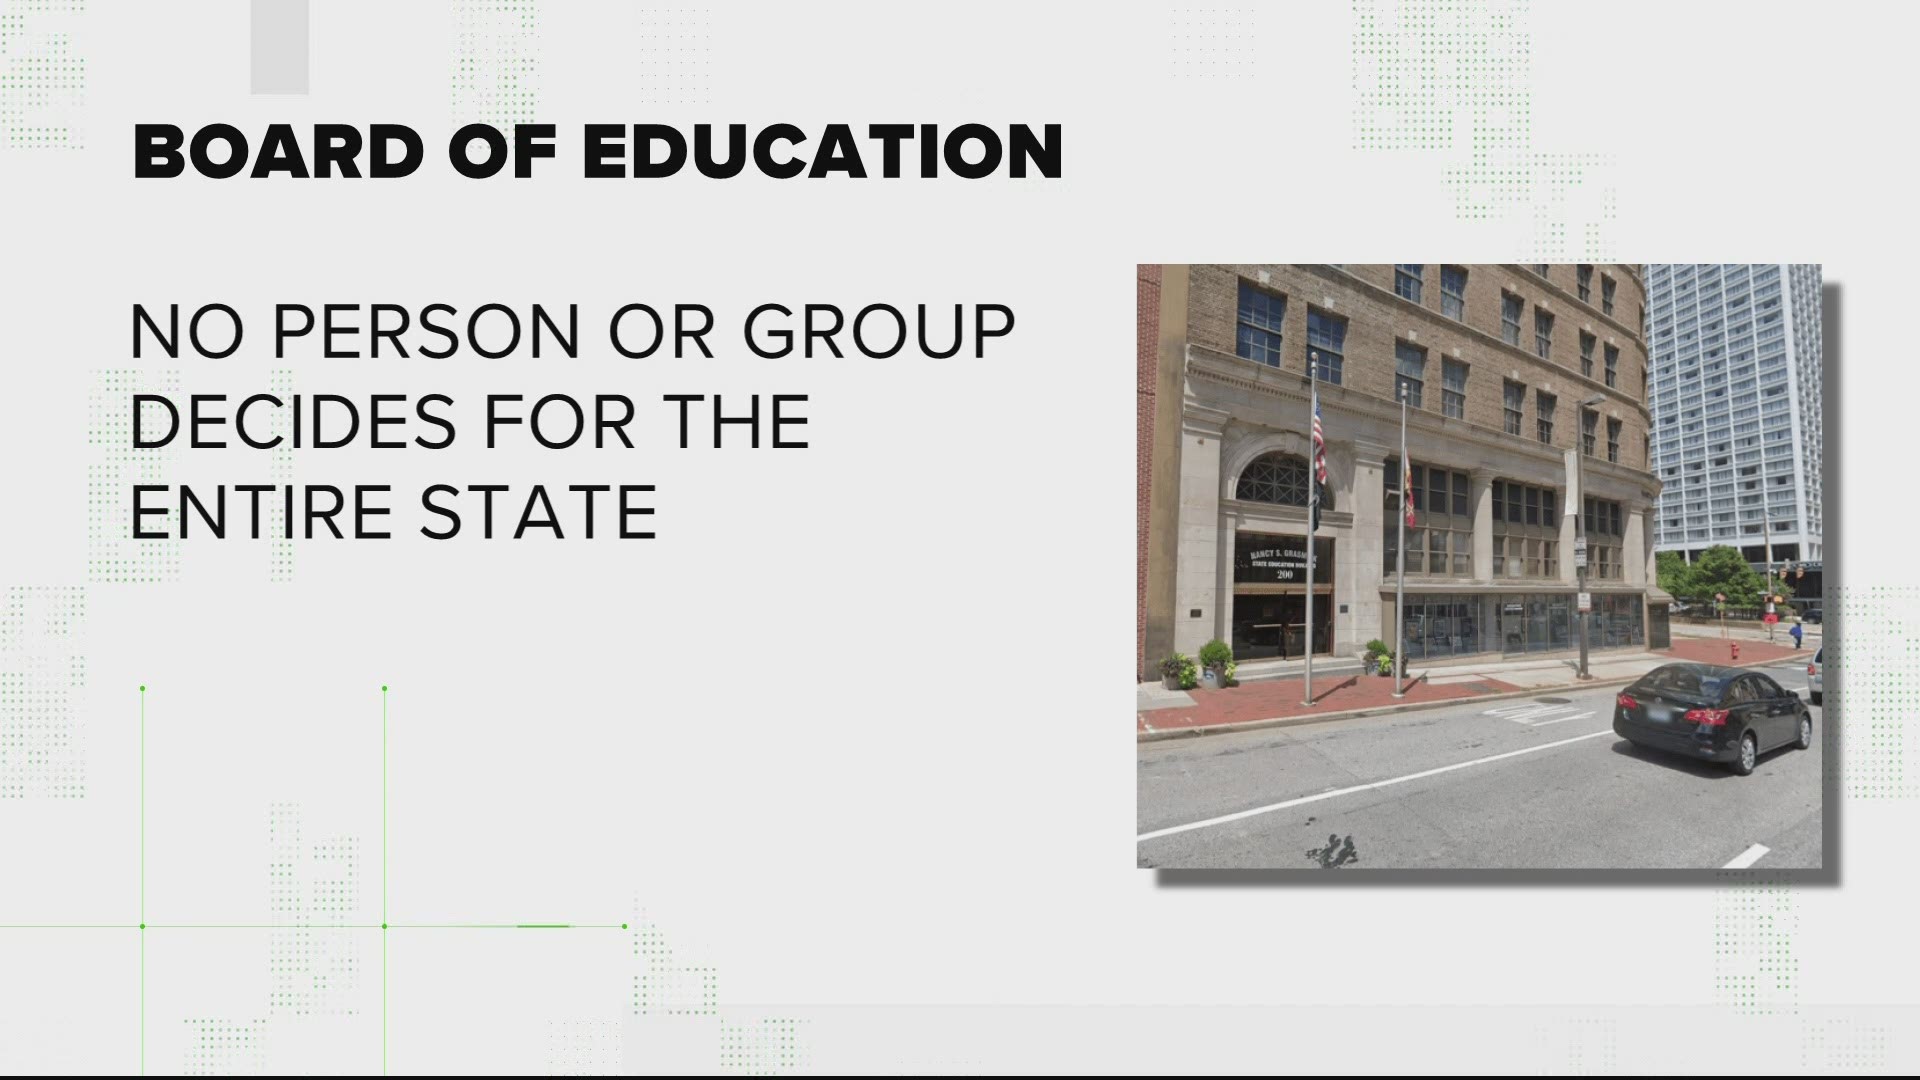 Governor Hogan wants students back in classrooms by March 1. The state teachers union has pushed back. Who makes the call?